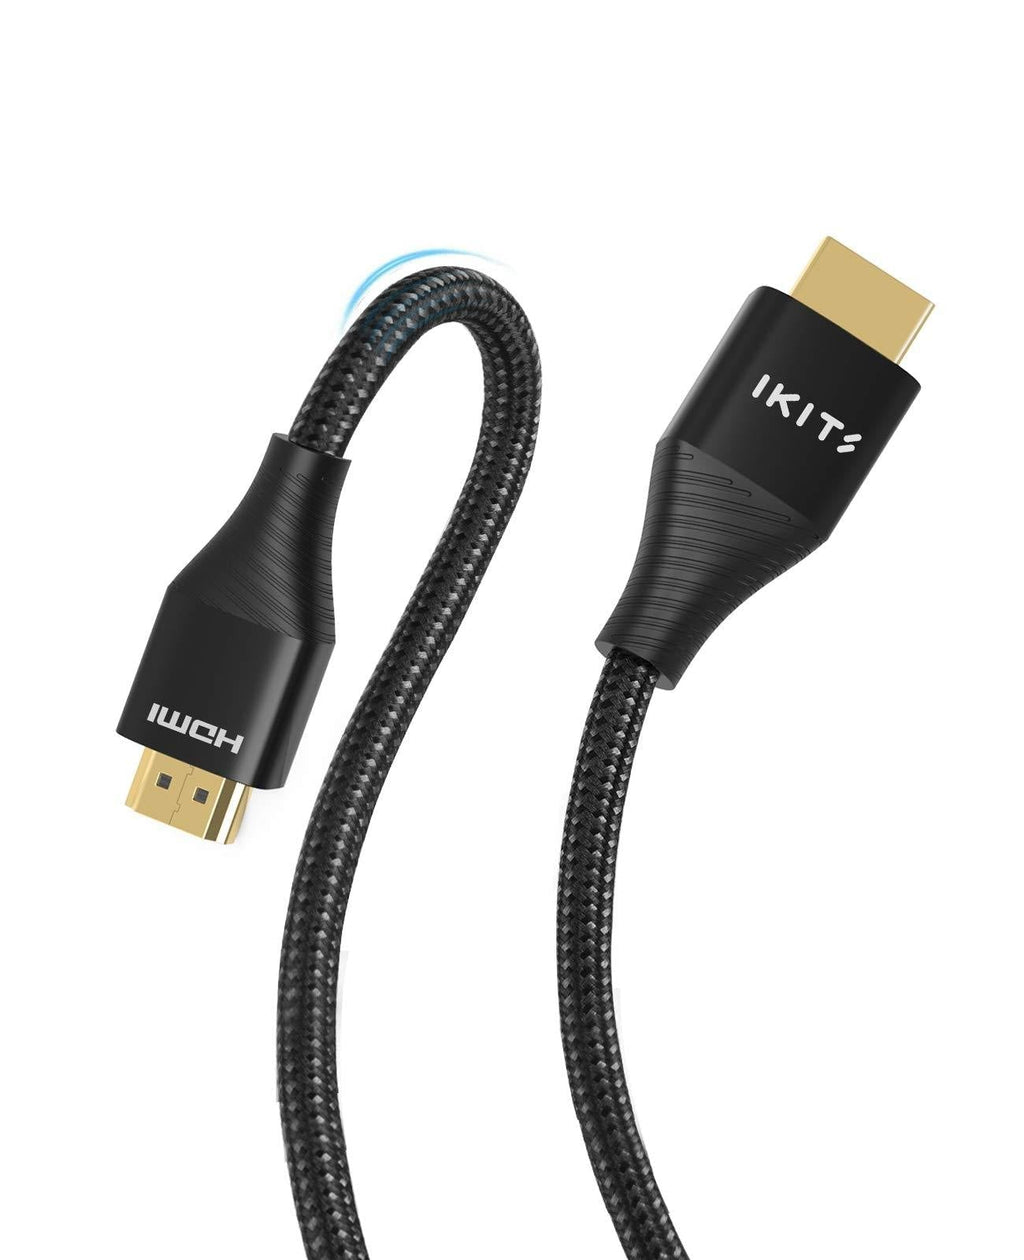 HDMI Cable 4K 6 Foot, IKITS HDMI 2.0 Cable 18Gbps High Speed HDMI Cable Braided-4K HDR, HDCP 2.2/1.4, 3D, 2160P, 1080P, Ethernet-Audio Return Compatible with UHD TV, Blu-ray, PS4/3, PC, Fire TV